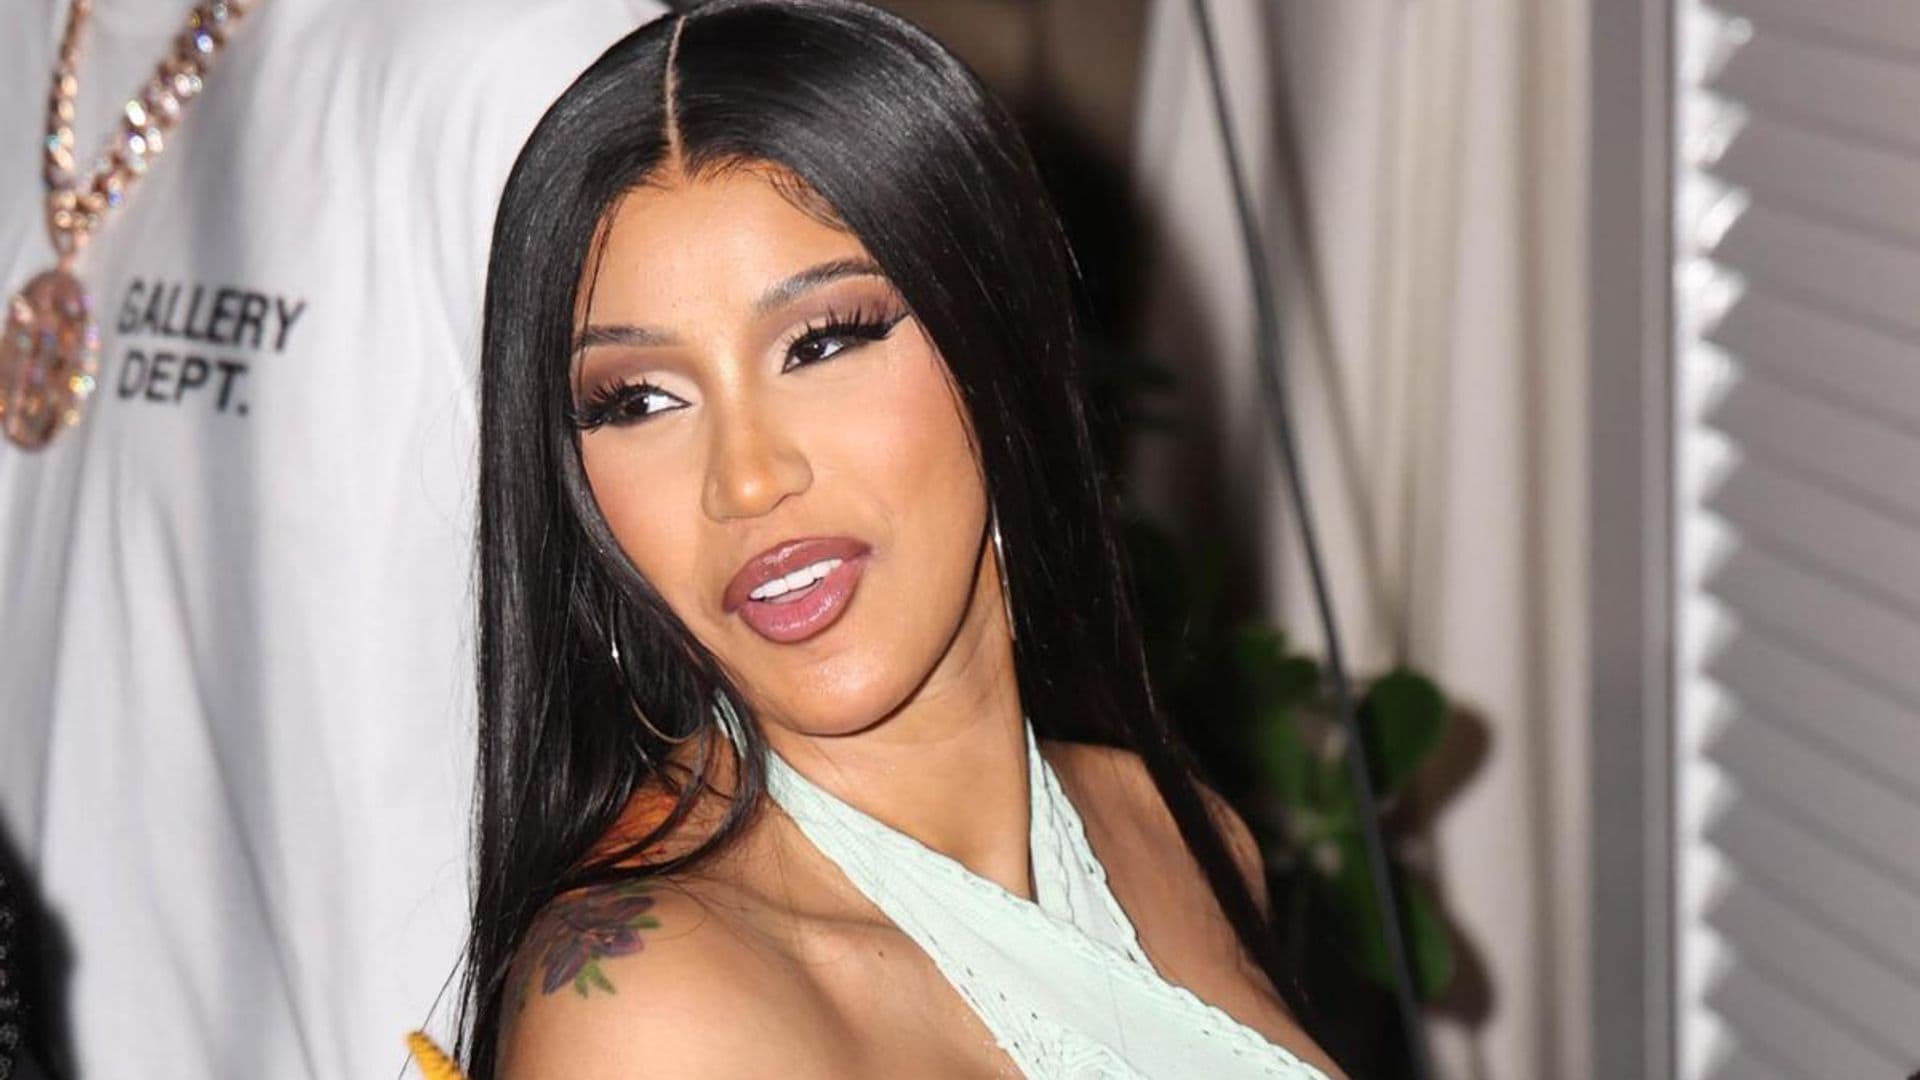 Cardi B weighs in on Russia-Ukraine Crisis: ‘This phone is not hacked, it’s really me’